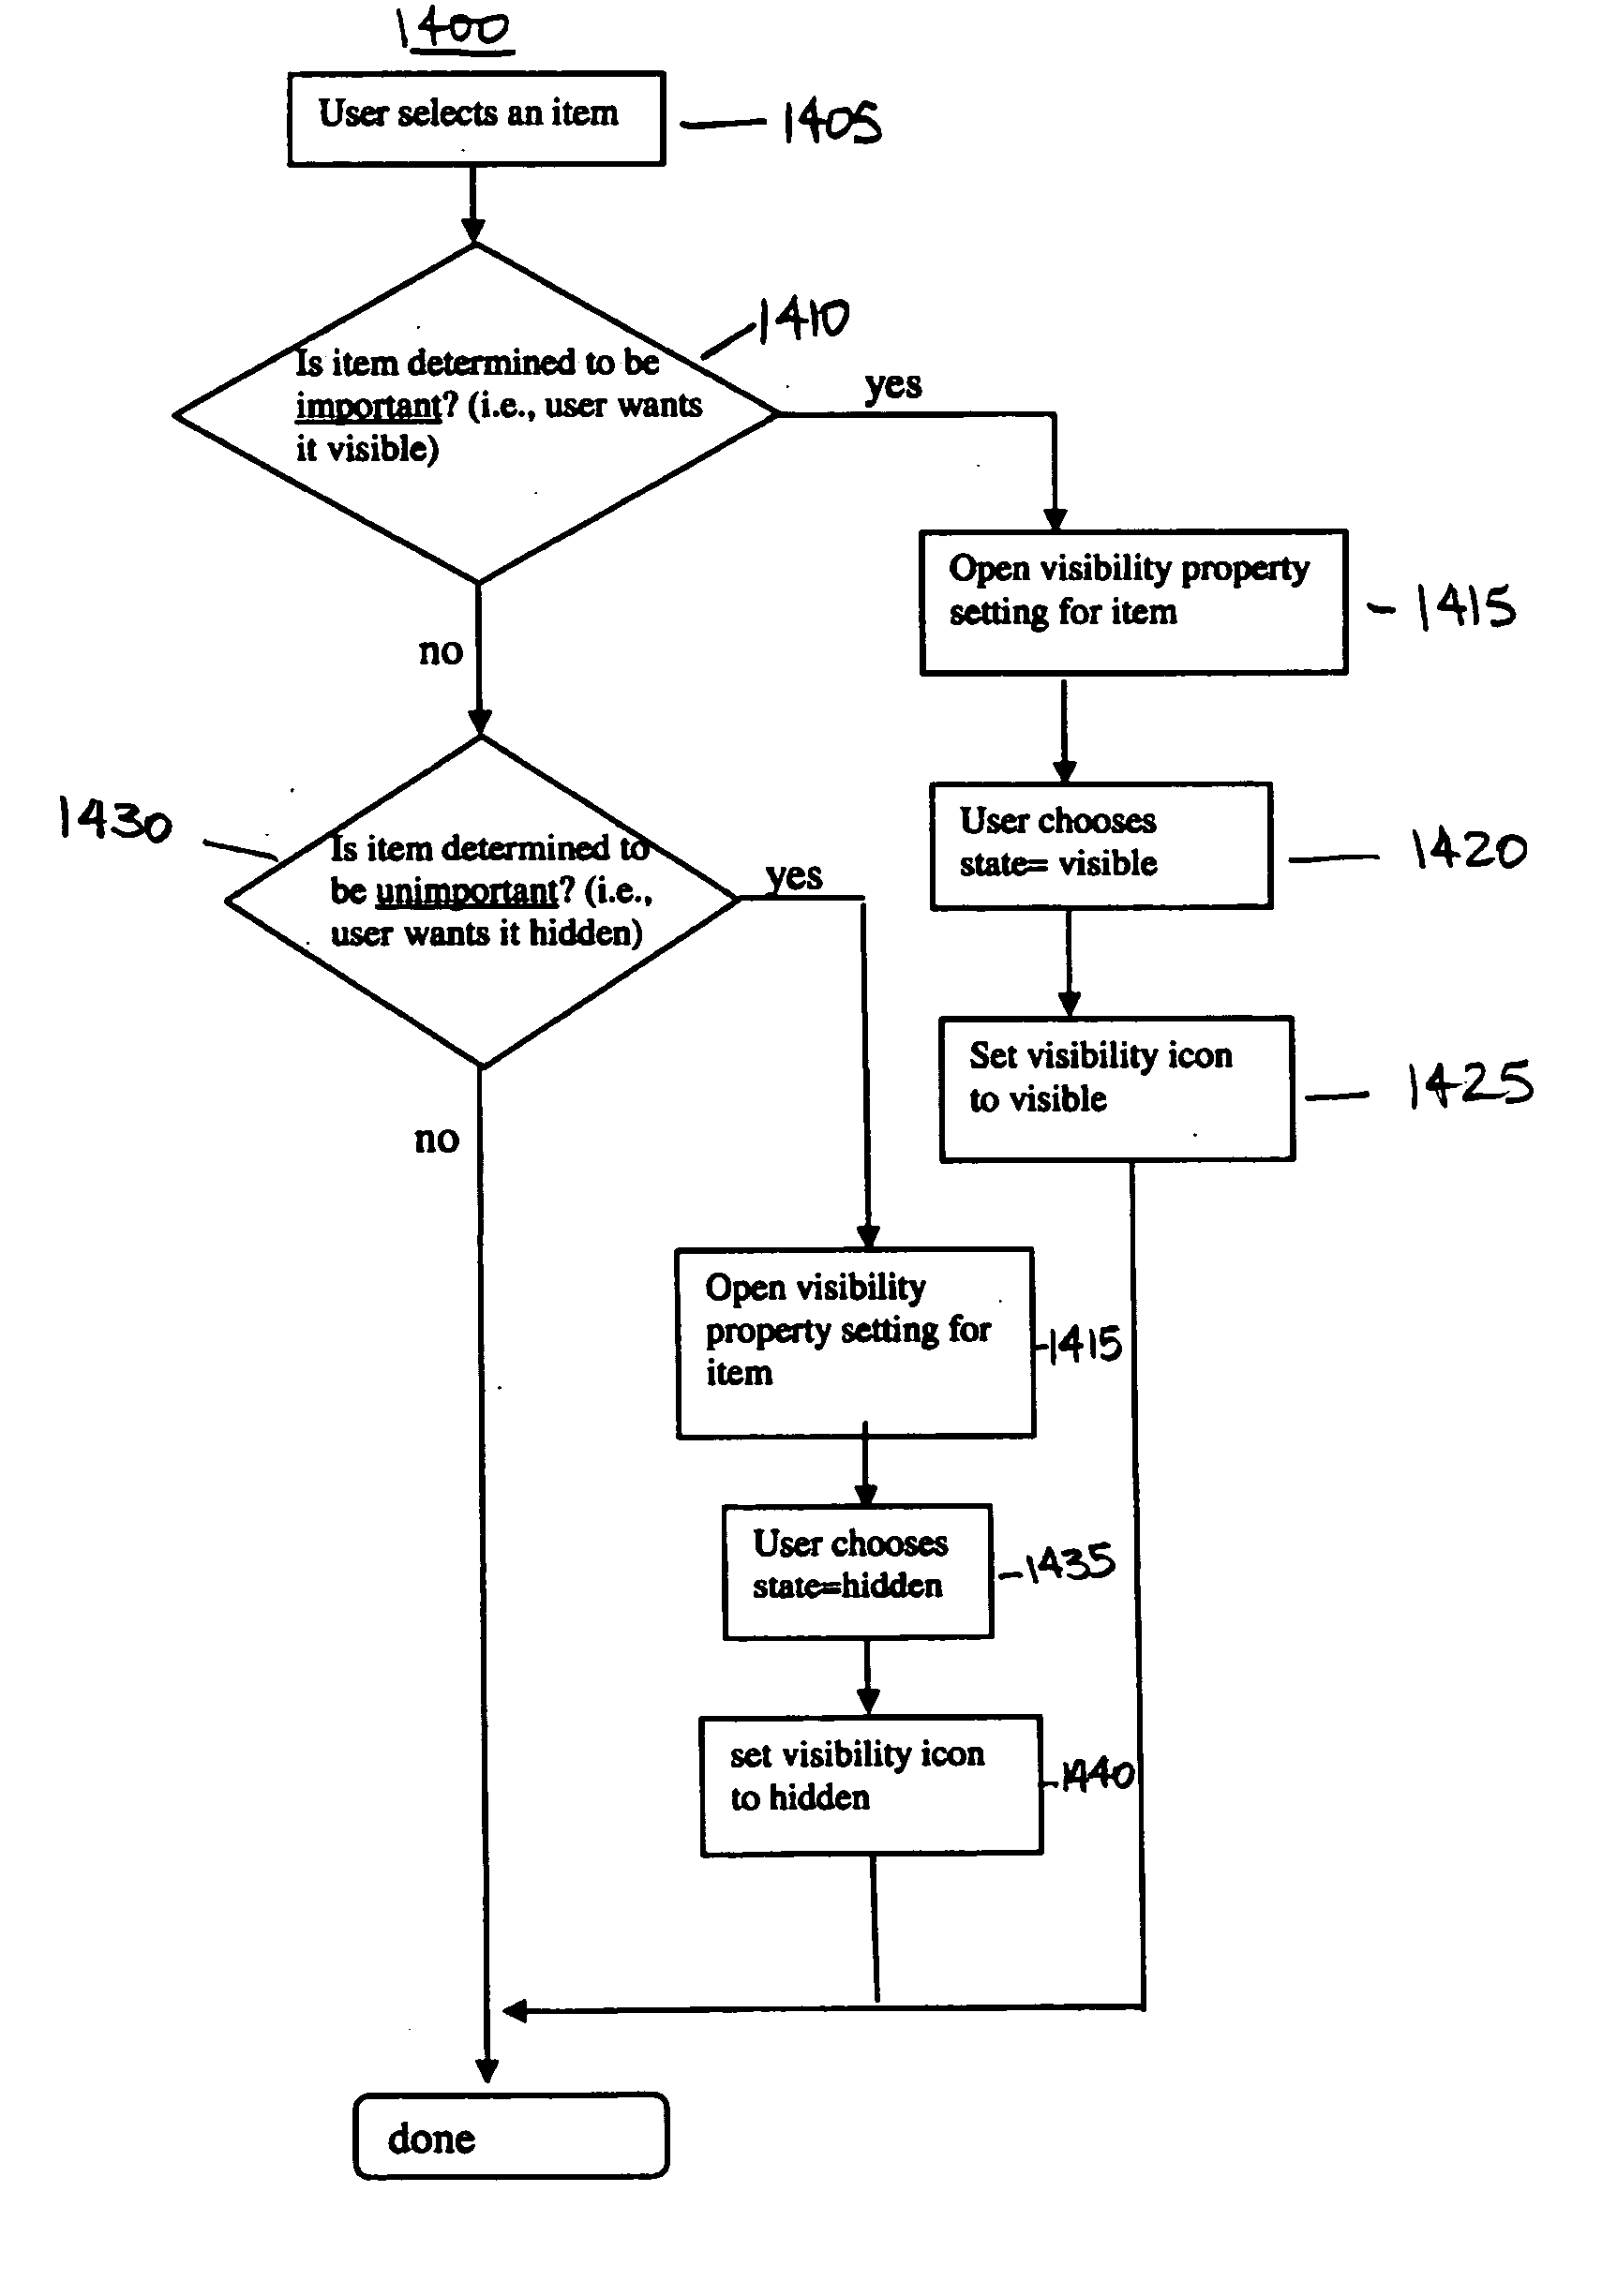 System and method for partially collapsing a hierarchical structure for information navigation